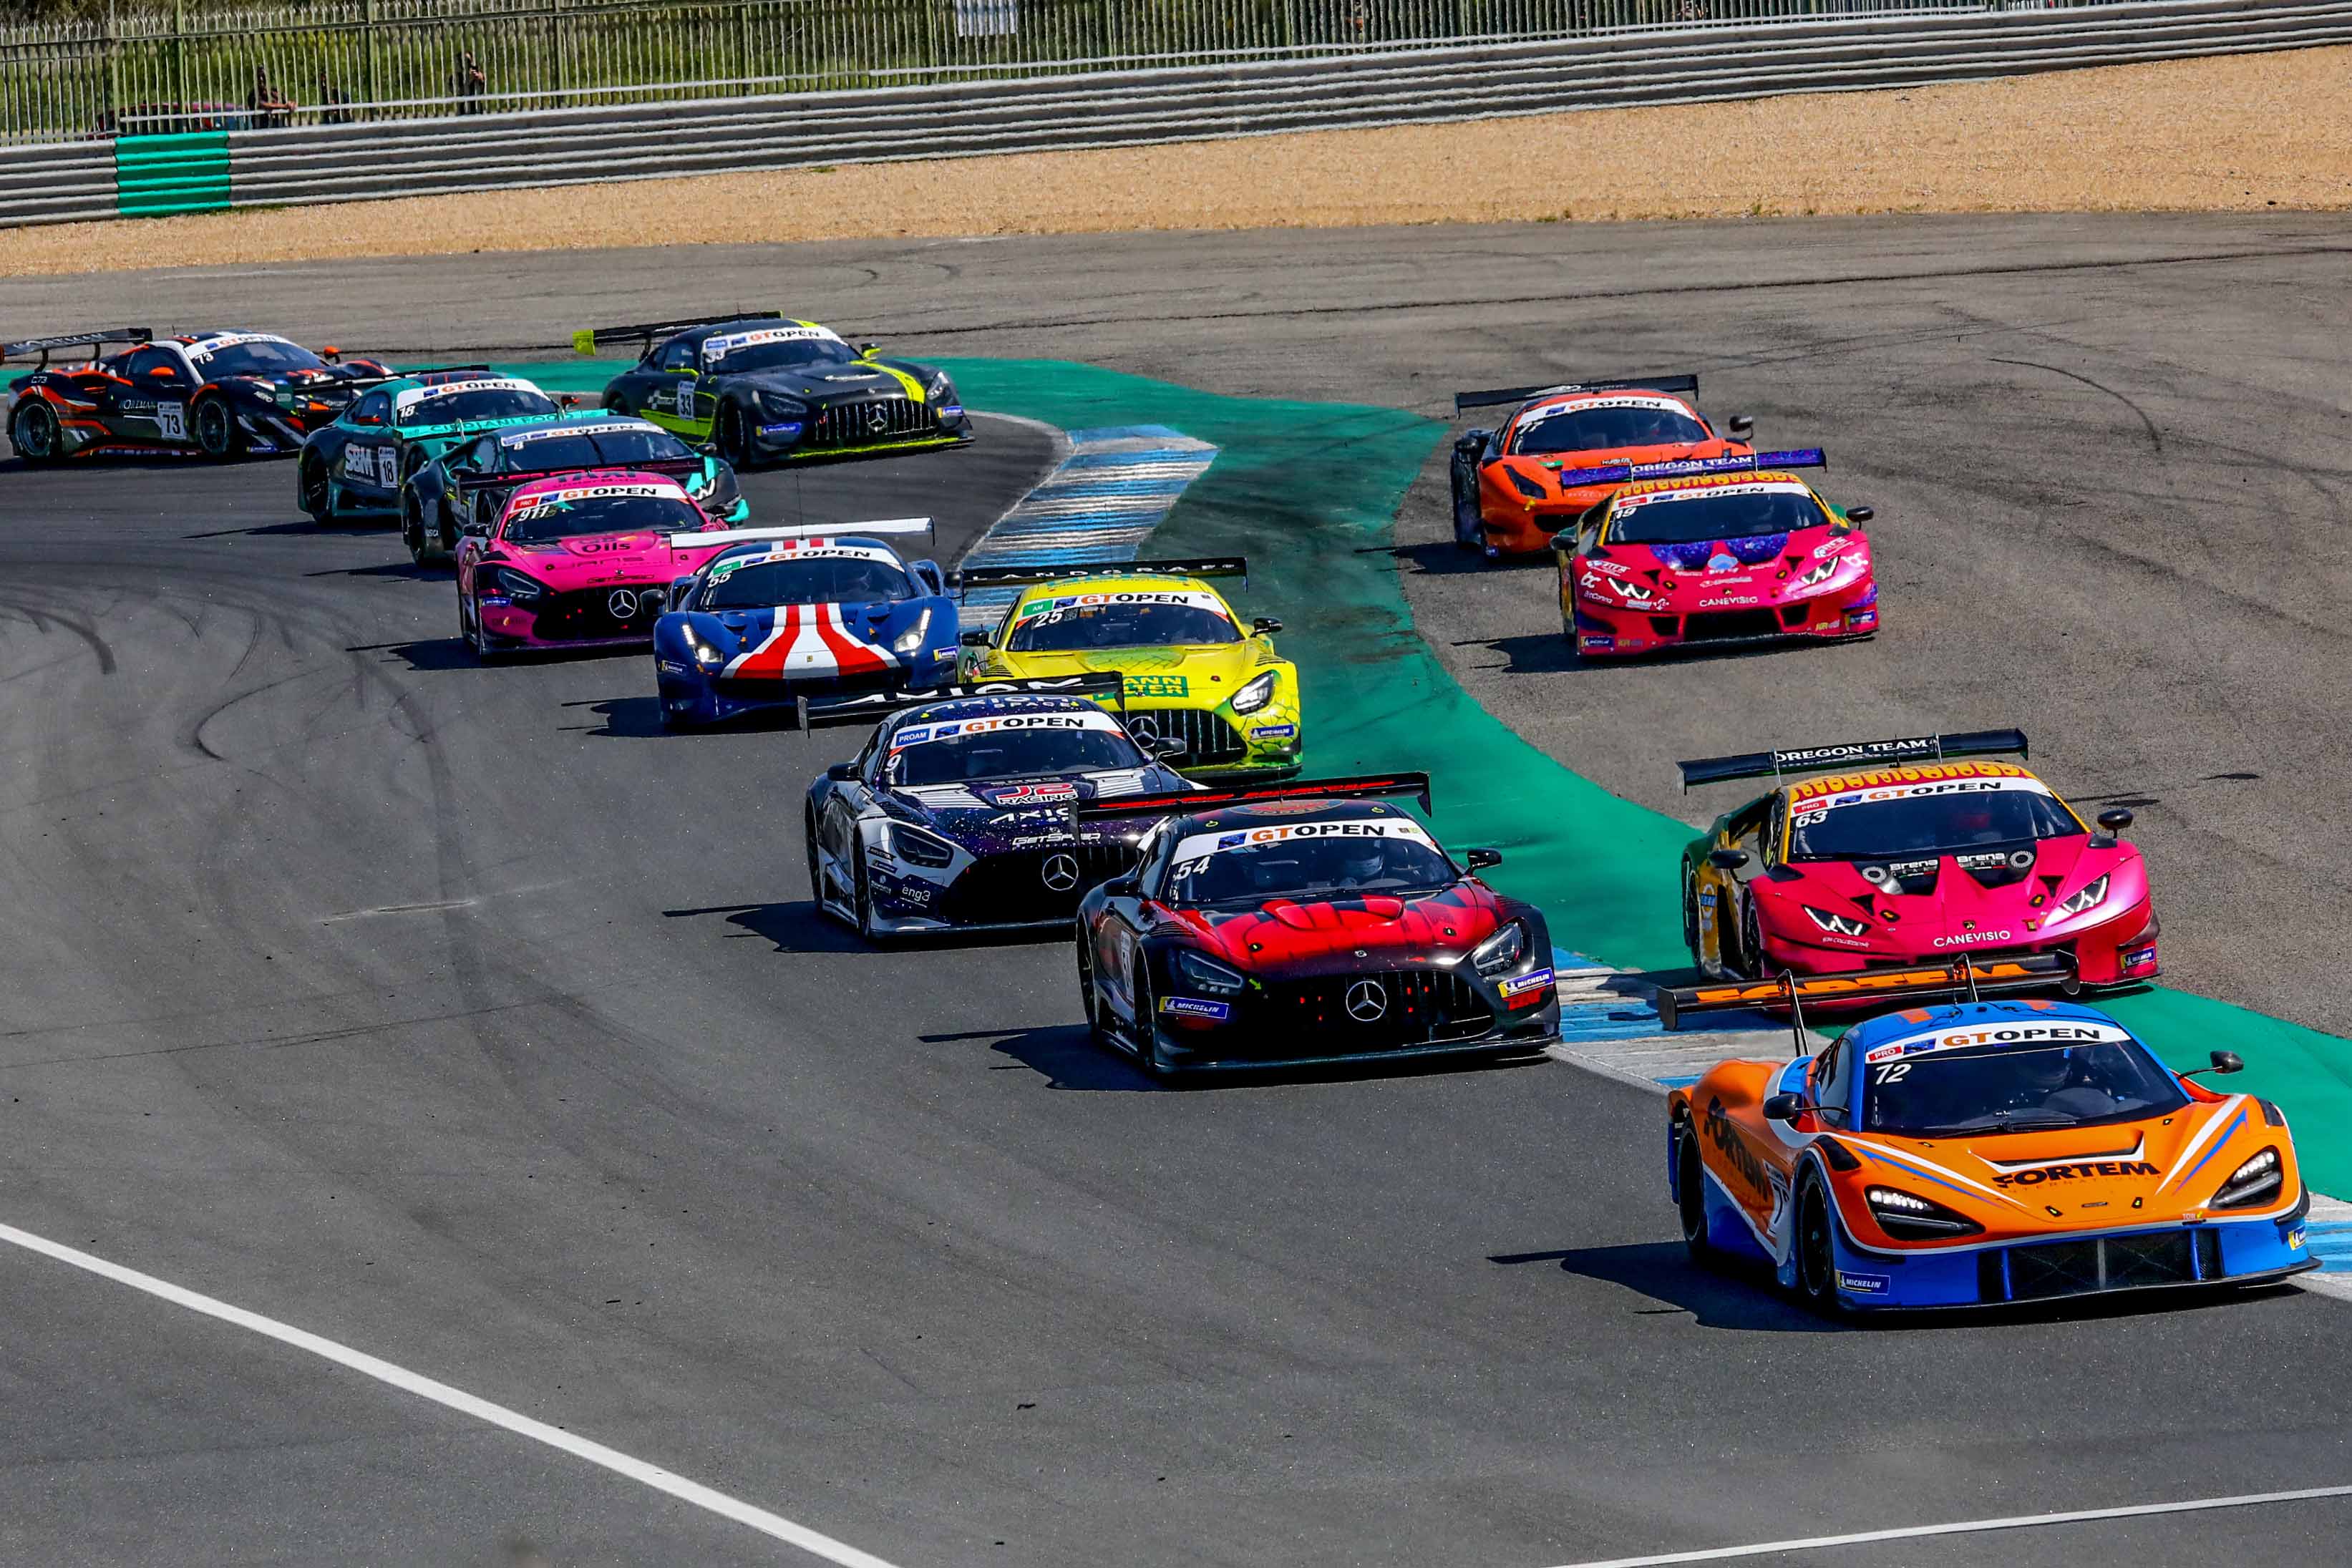 The 2022 International GT Open takes the ‘fast track’ at Paul Ricard